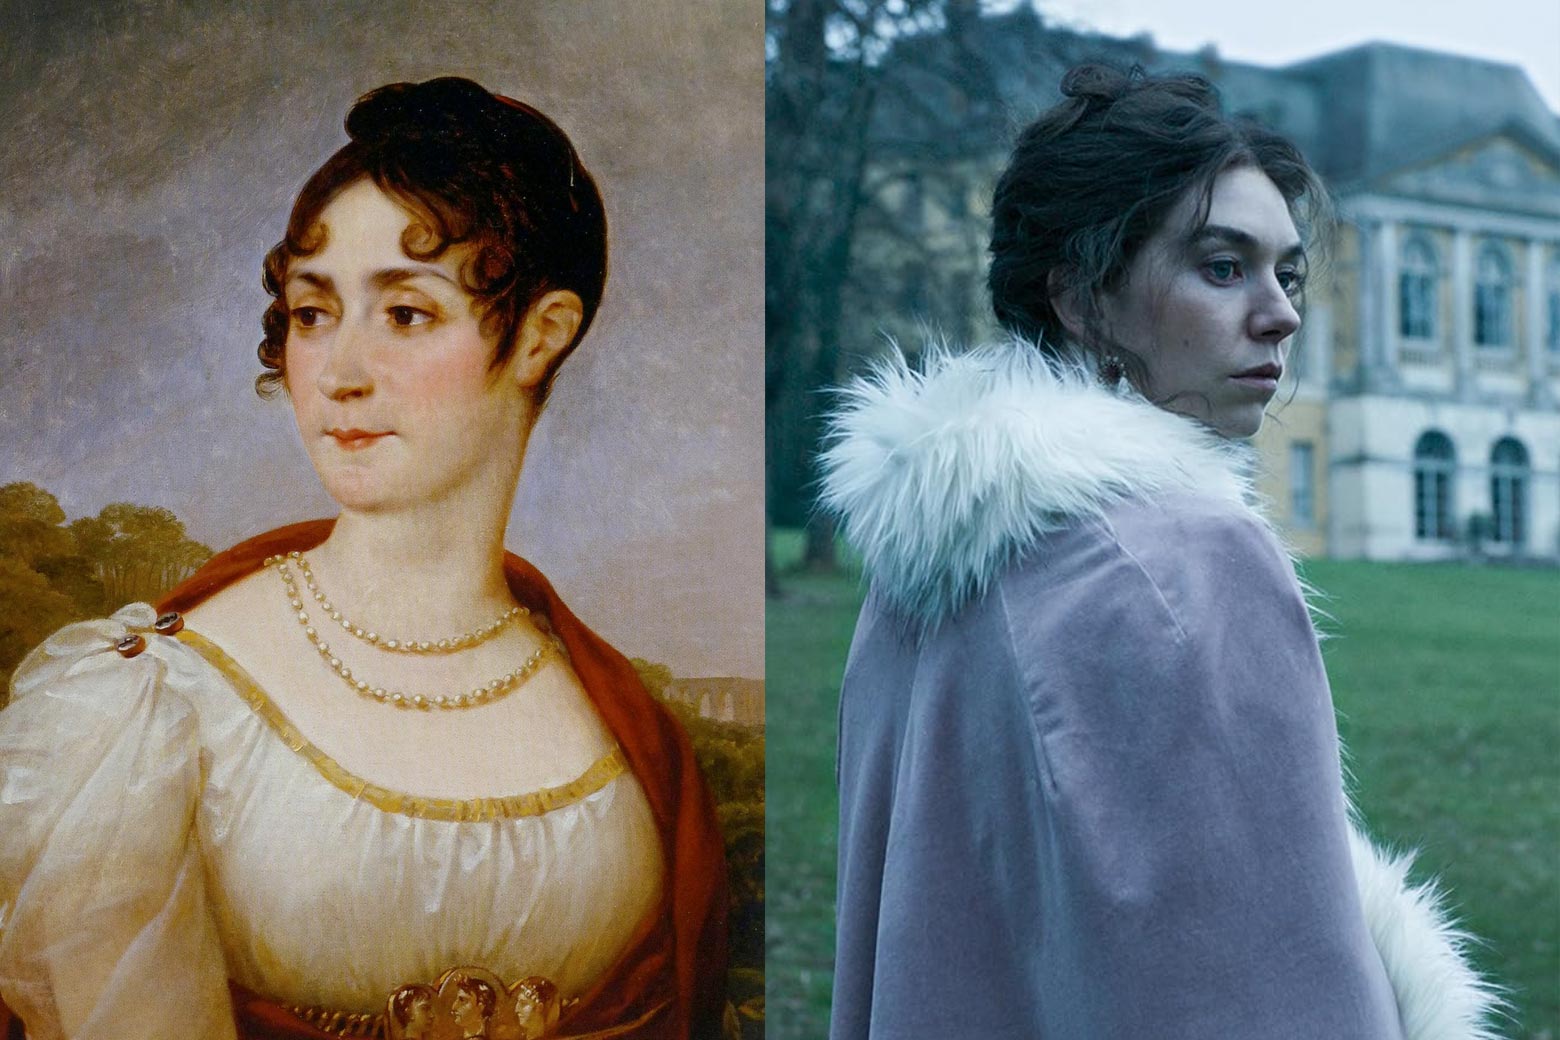 A painting of Empress Josephine next to a movie still of Vanessa Kirby as Josephine.